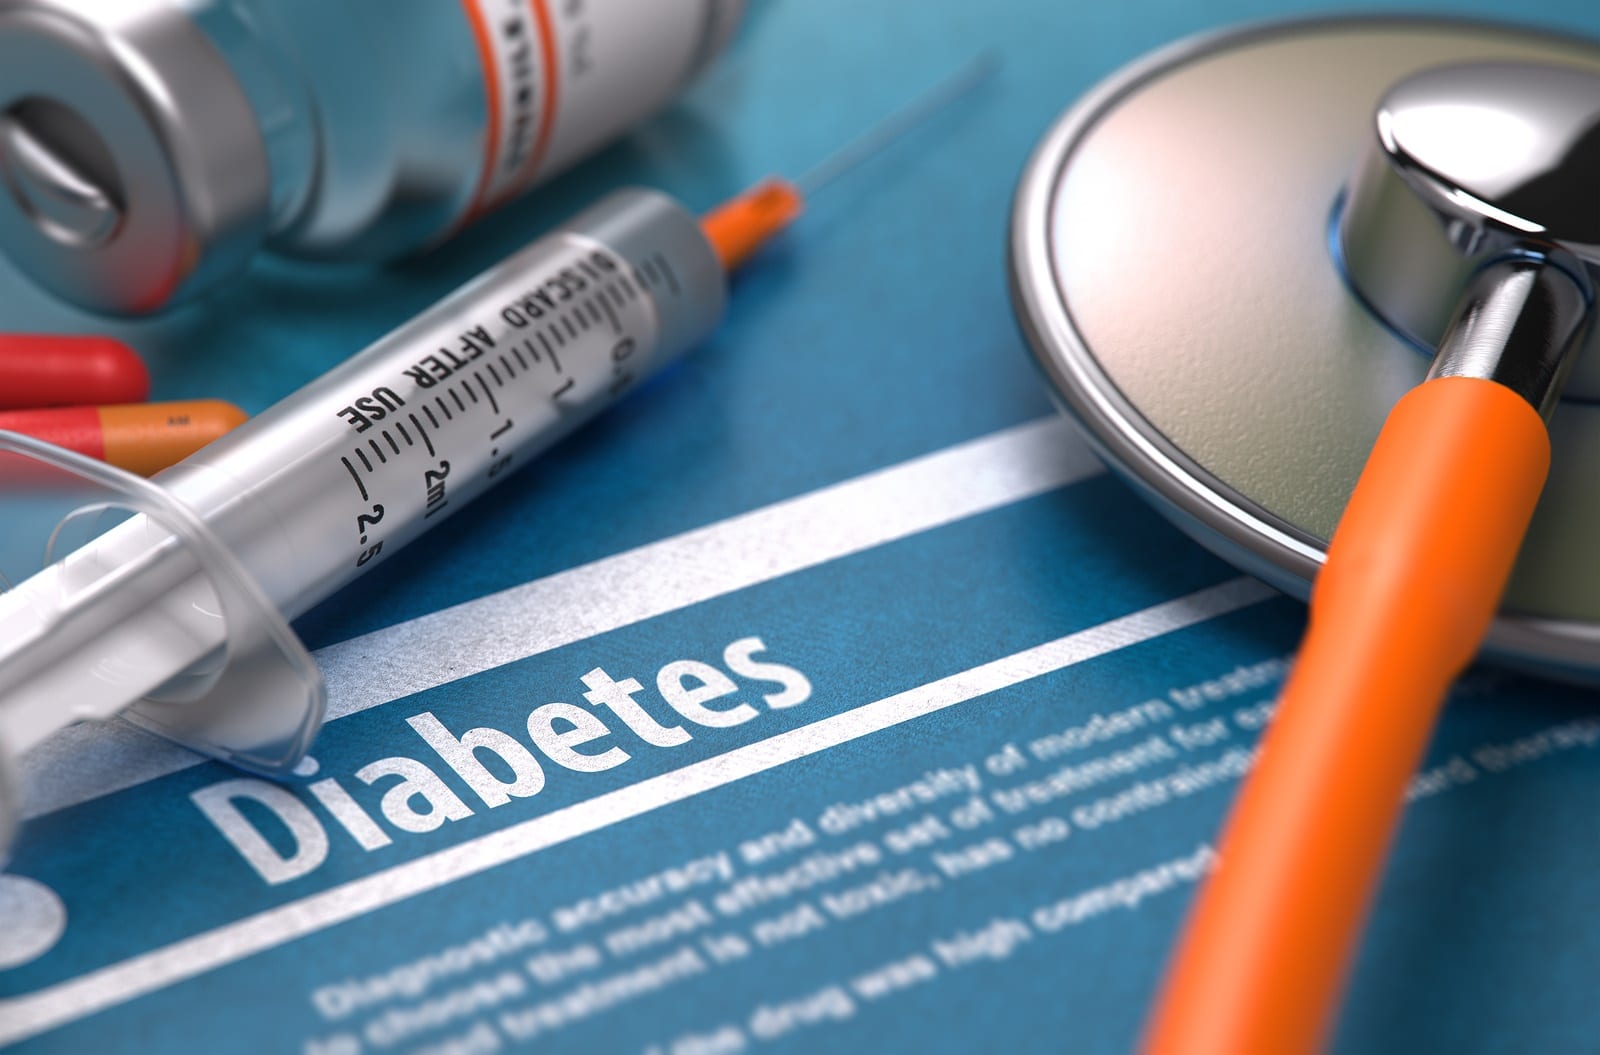 new findings in diabetes research